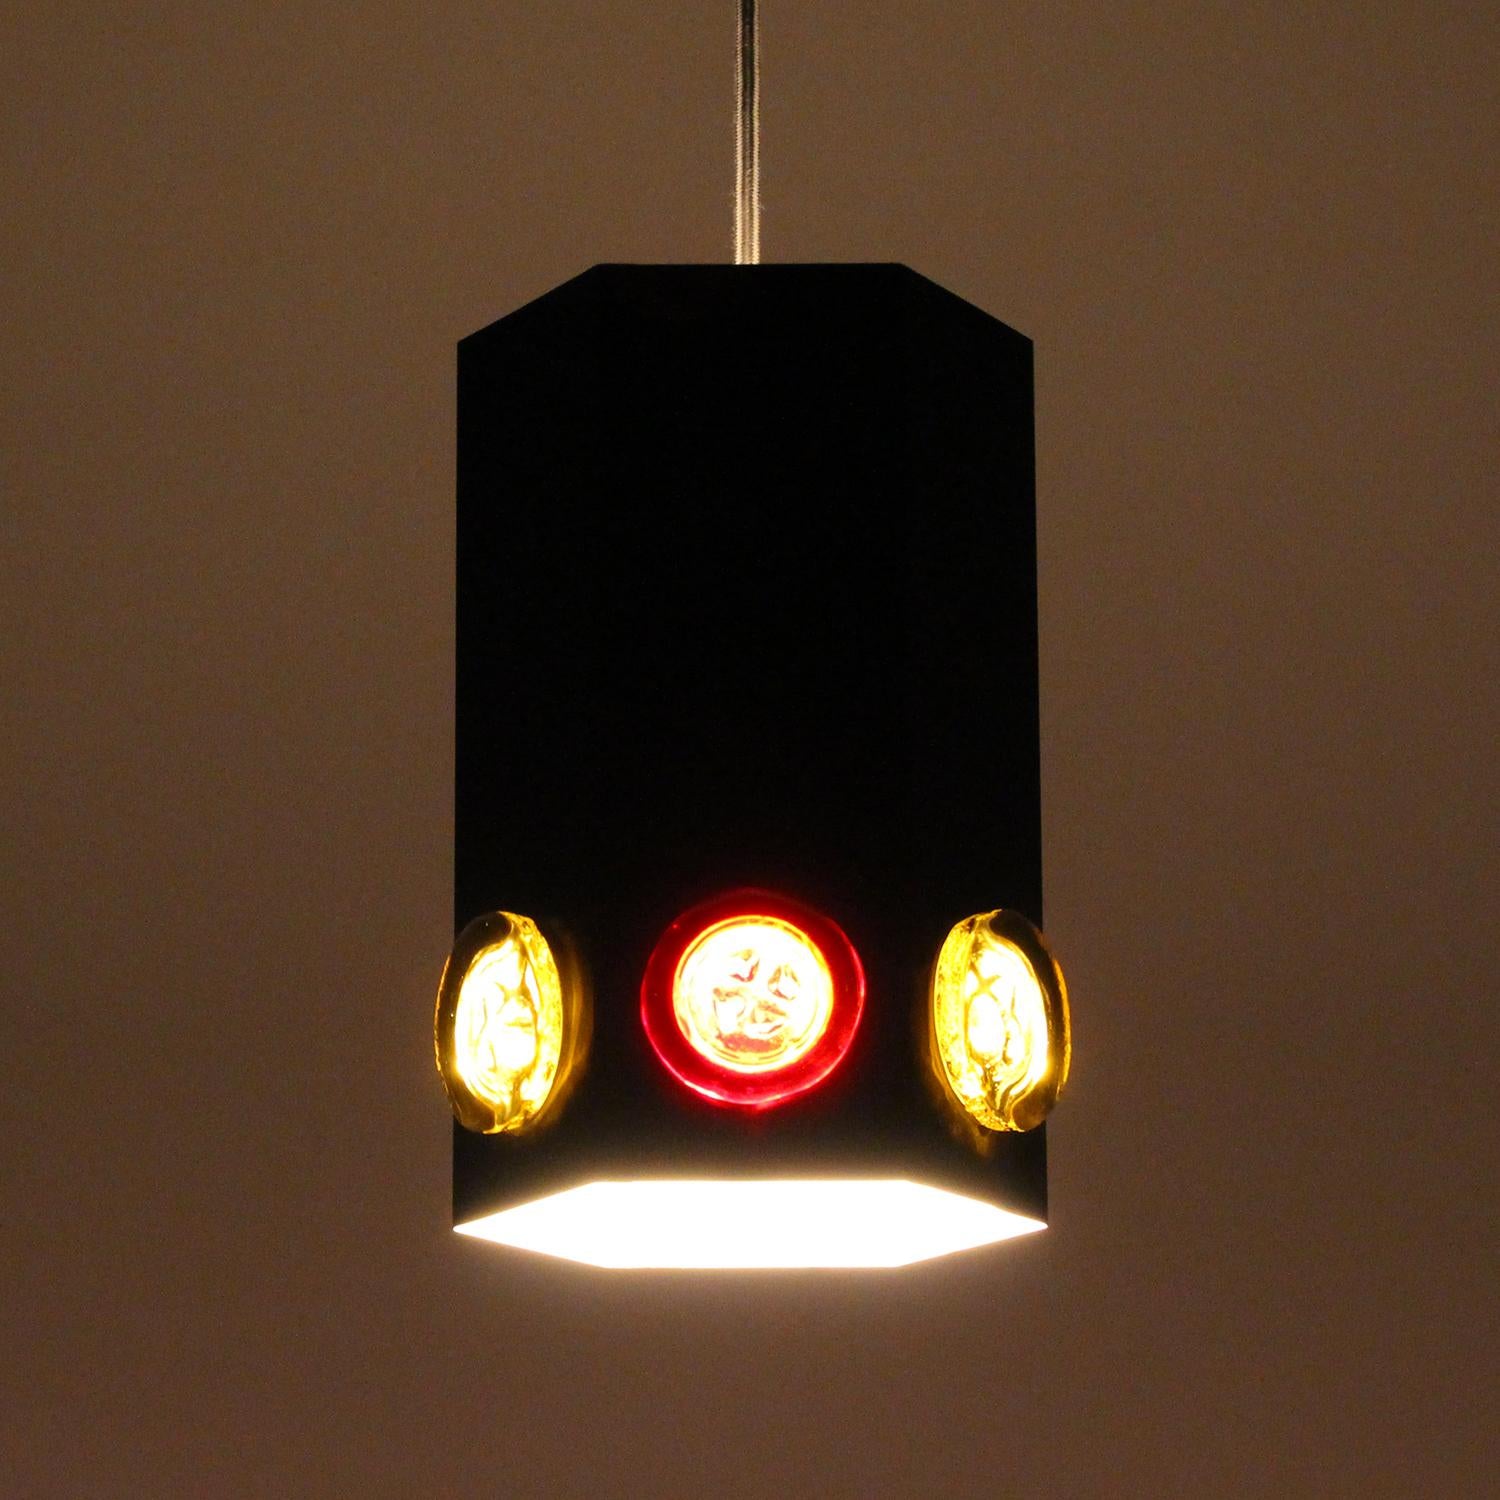 Pressed TYPE 6284, Black Pendant by Holm Sorensen & Co., 1960s Rare Metal and Glass Lamp